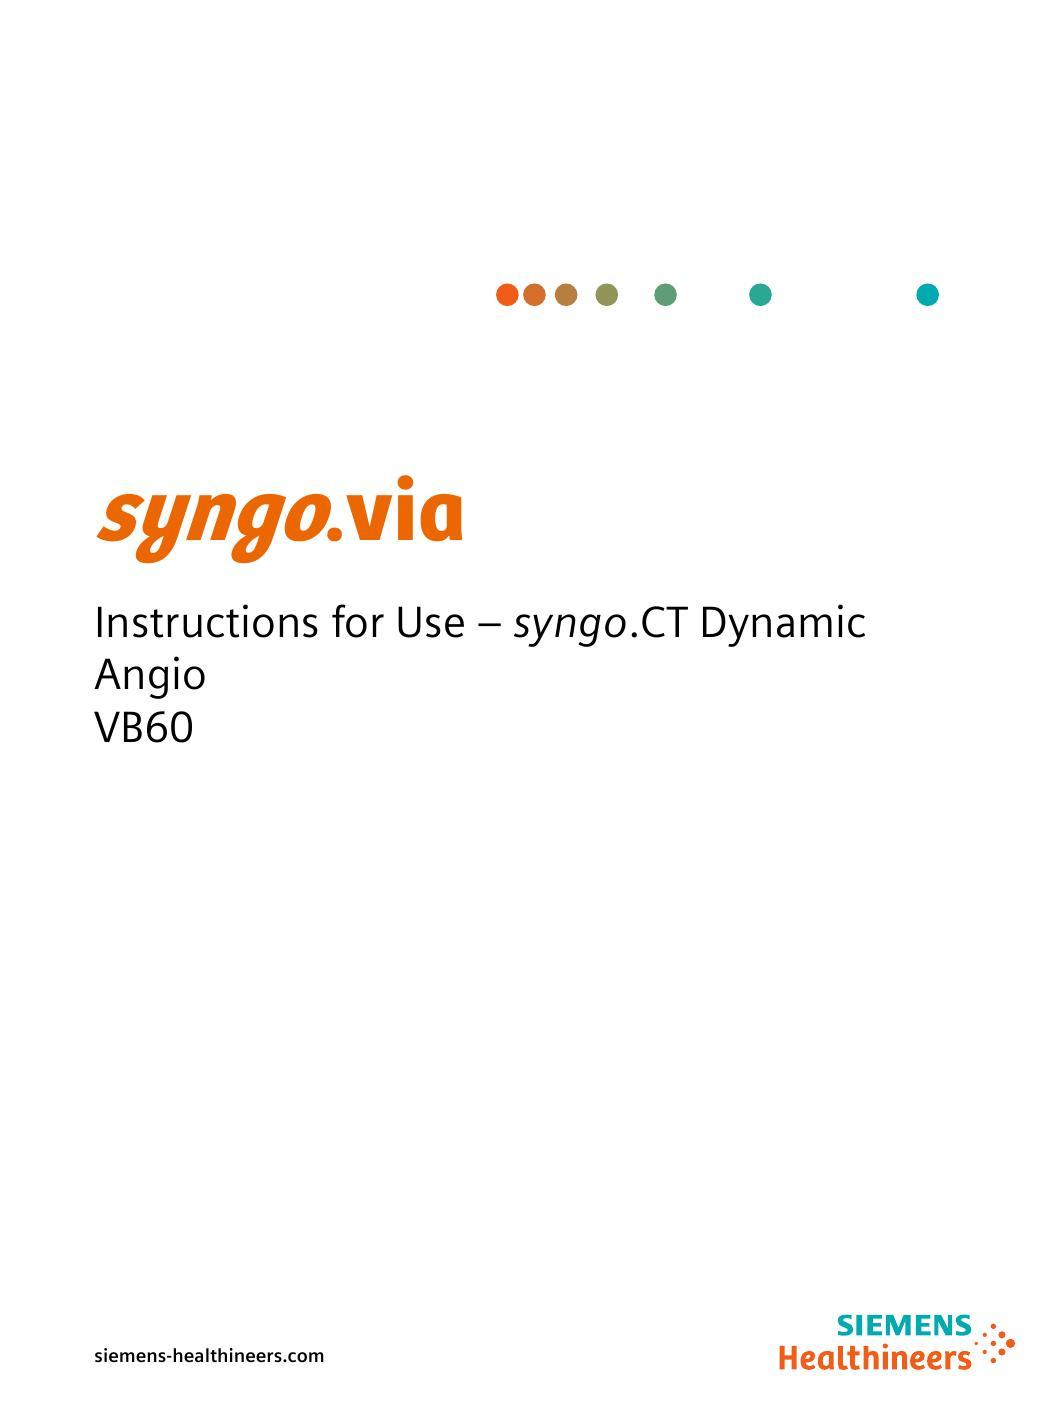 syngoct-dynamic-angio-instructions-for-use.pdf